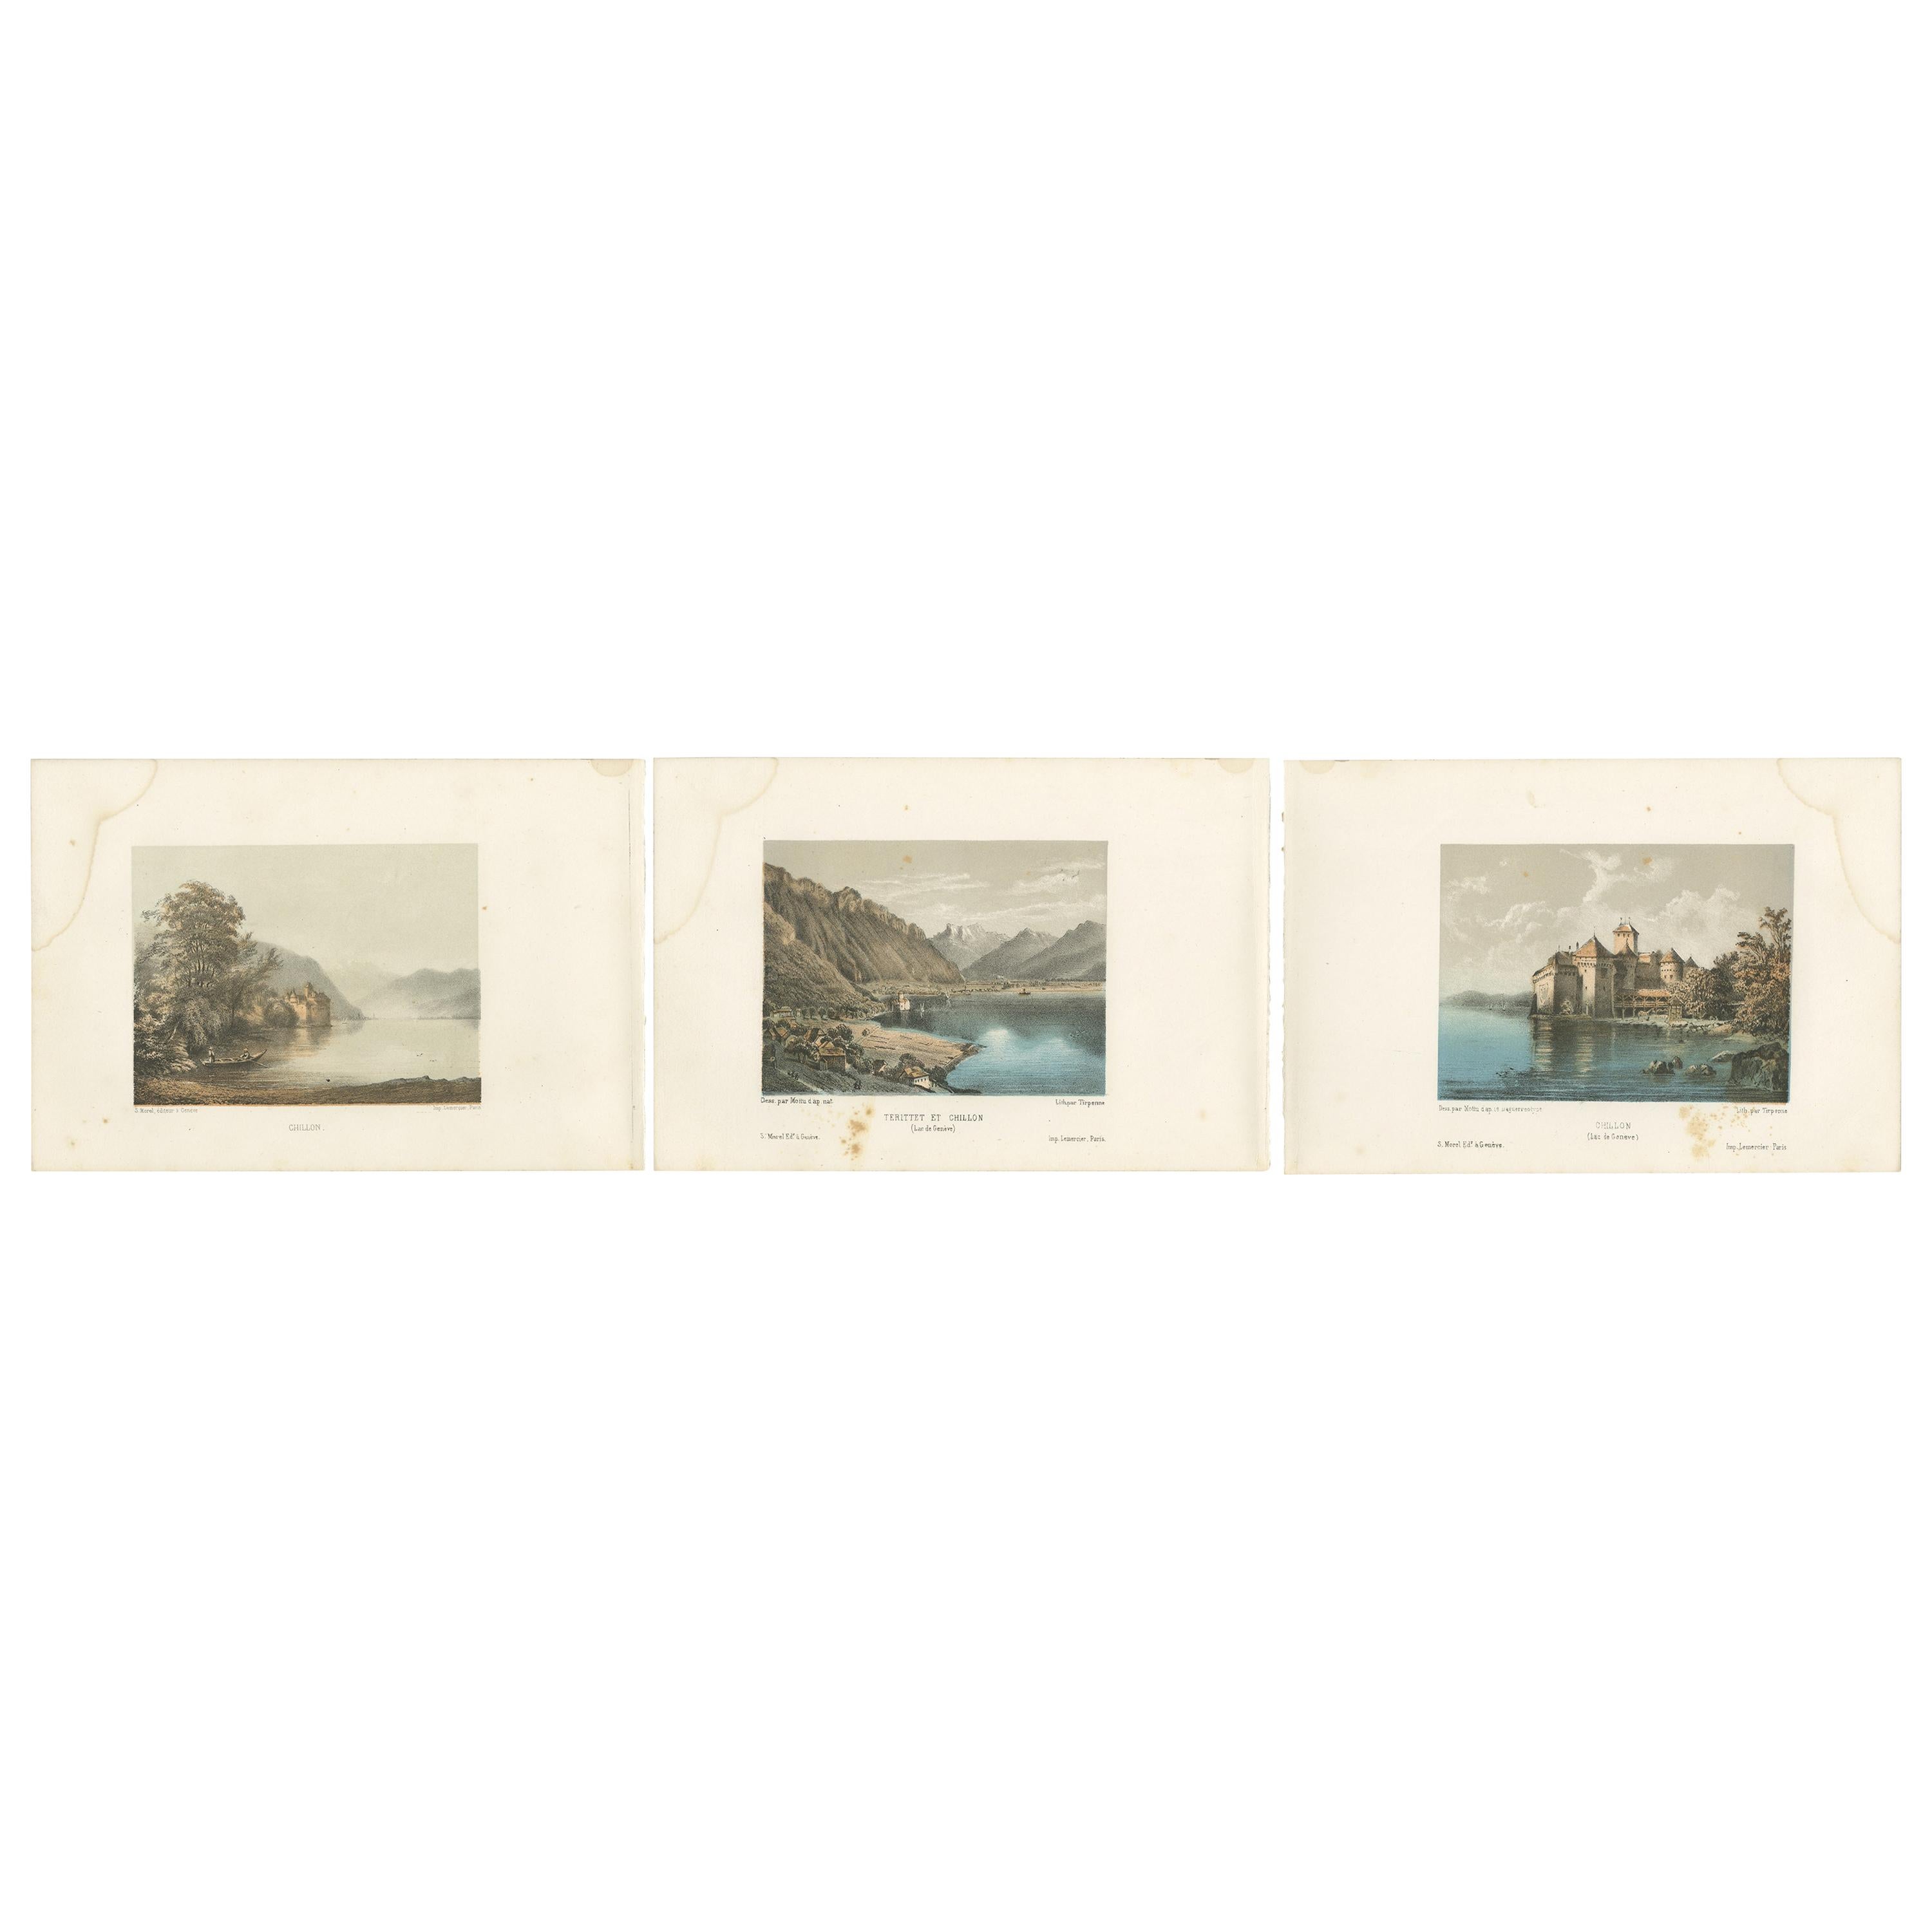 Set of 3 Antique Prints of Switzerland, Chillon, by Morel 'circa 1850' For Sale